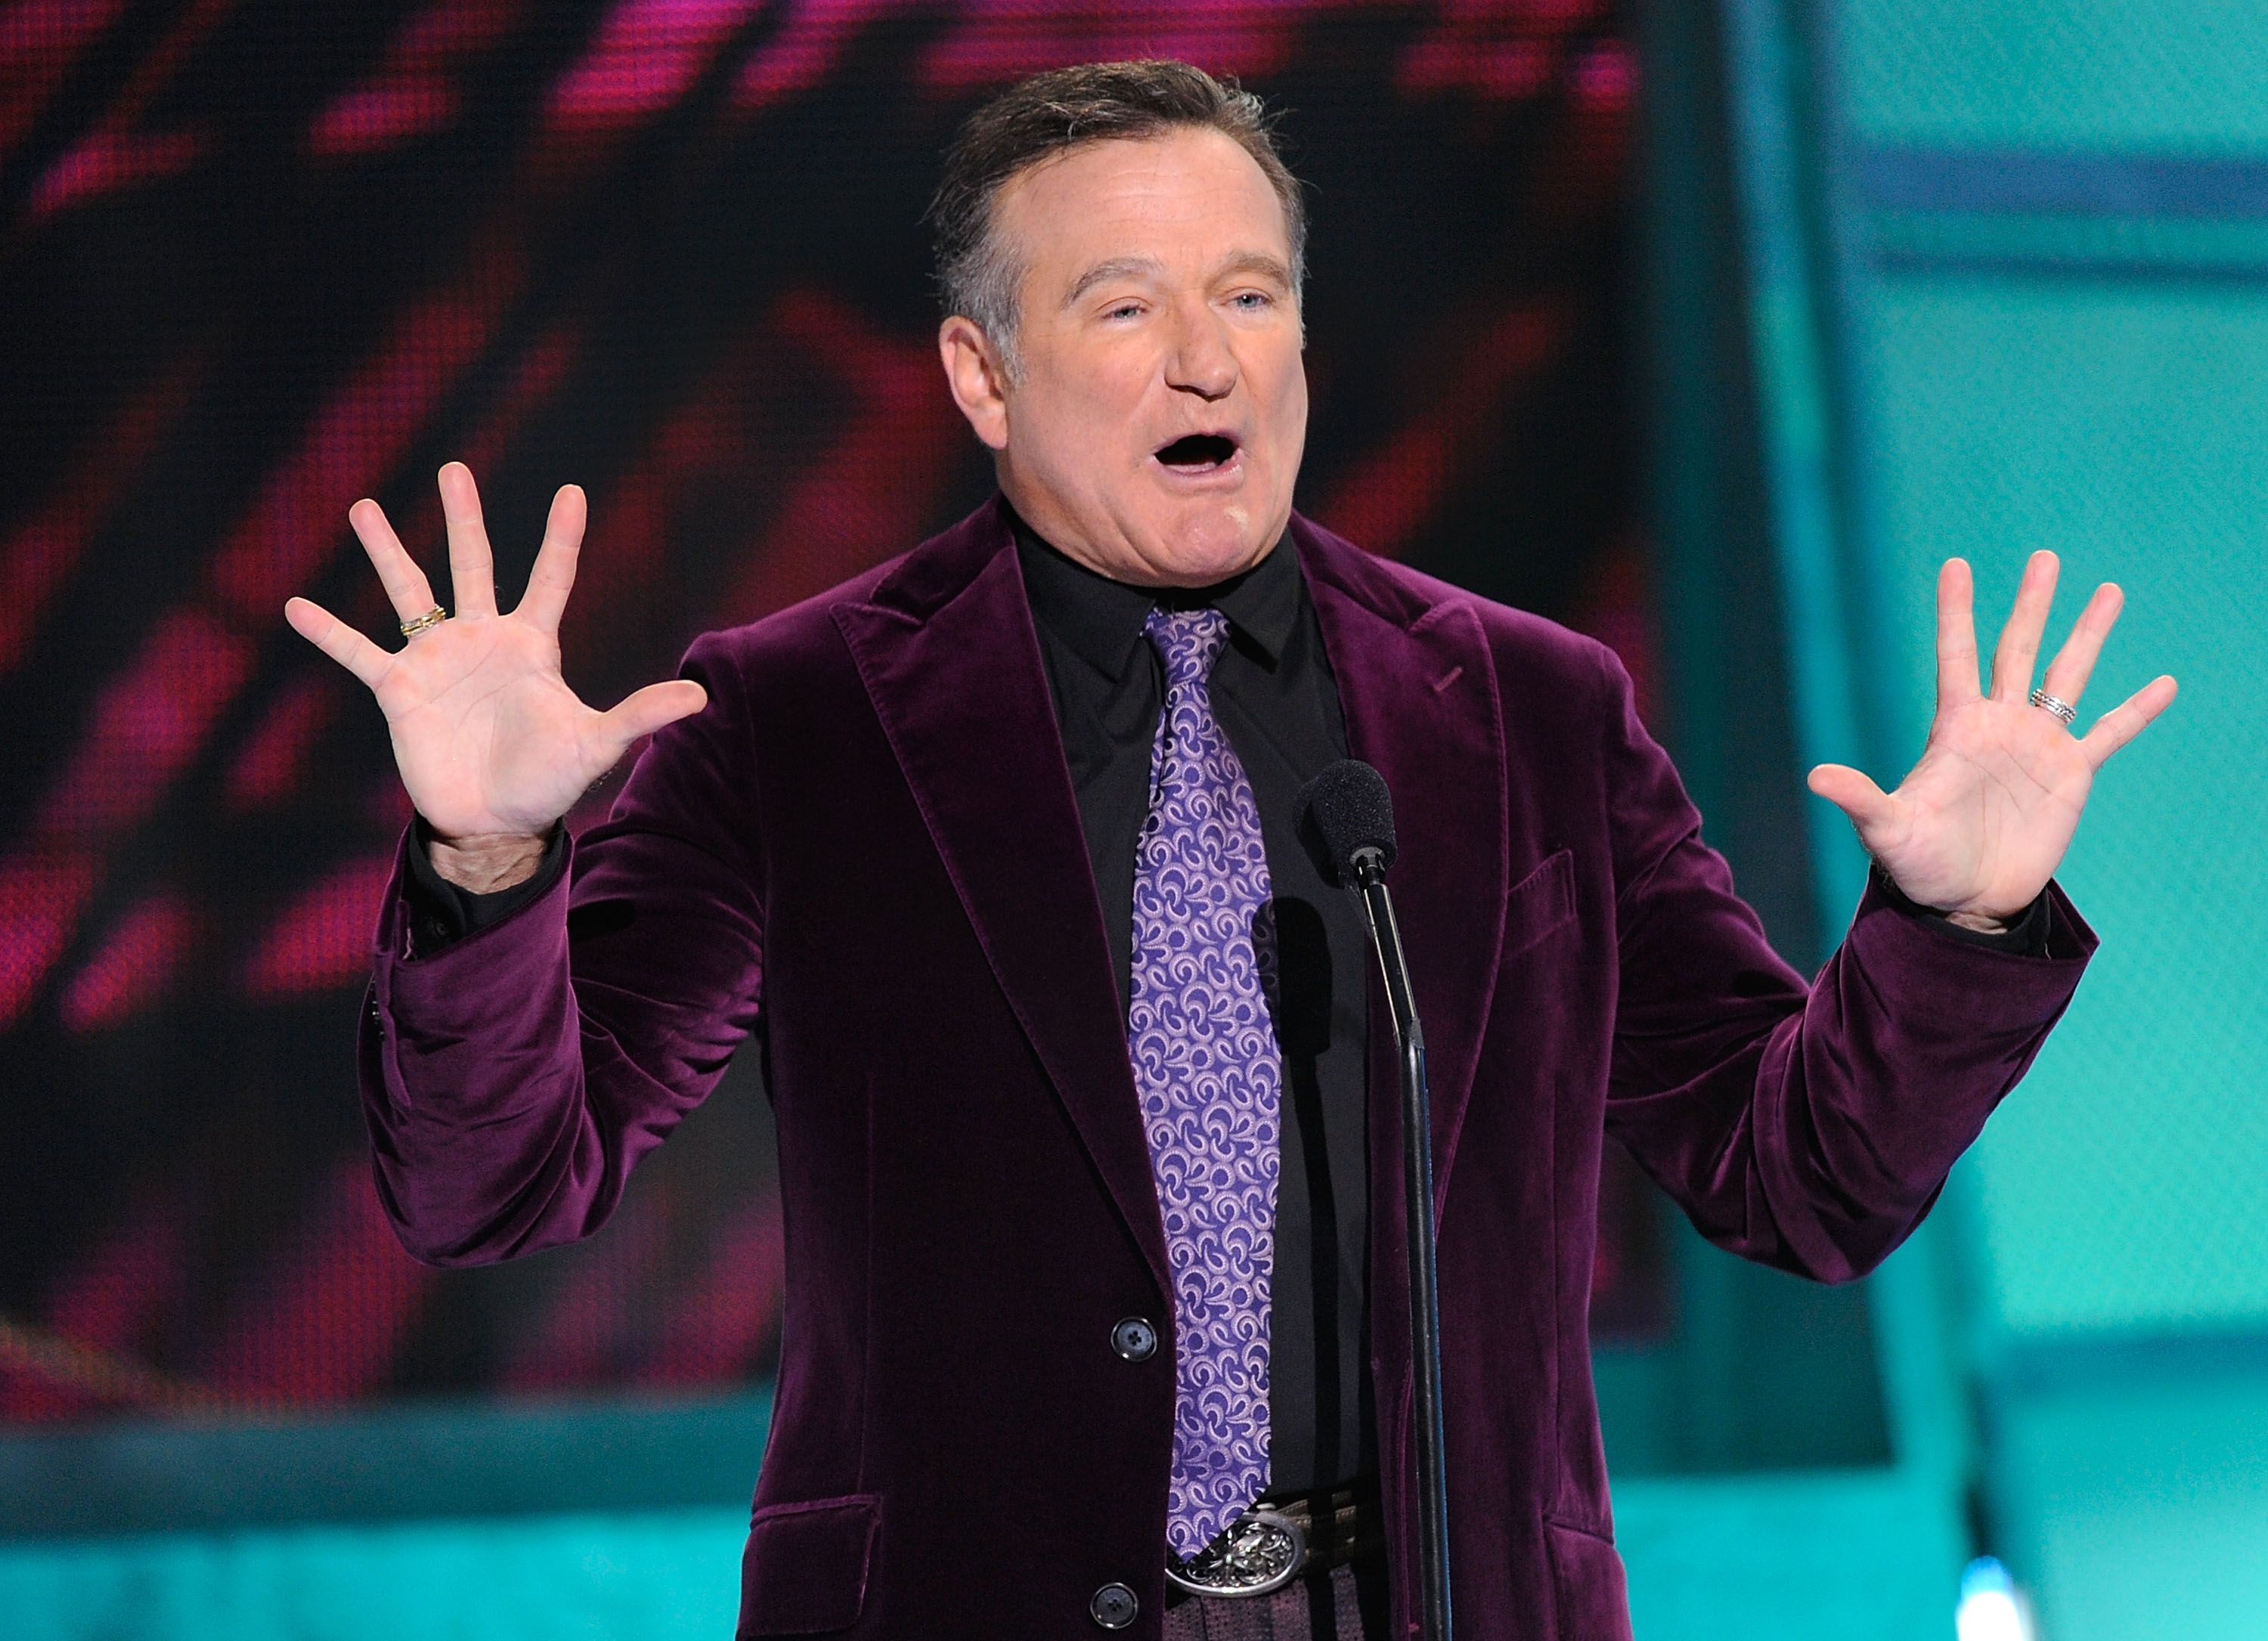 Presenter Robin Williams speaks at the 35th Annual People's Choice Awards held at the Shrine Auditorium on January 7, 2009 | Photo: Getty Images